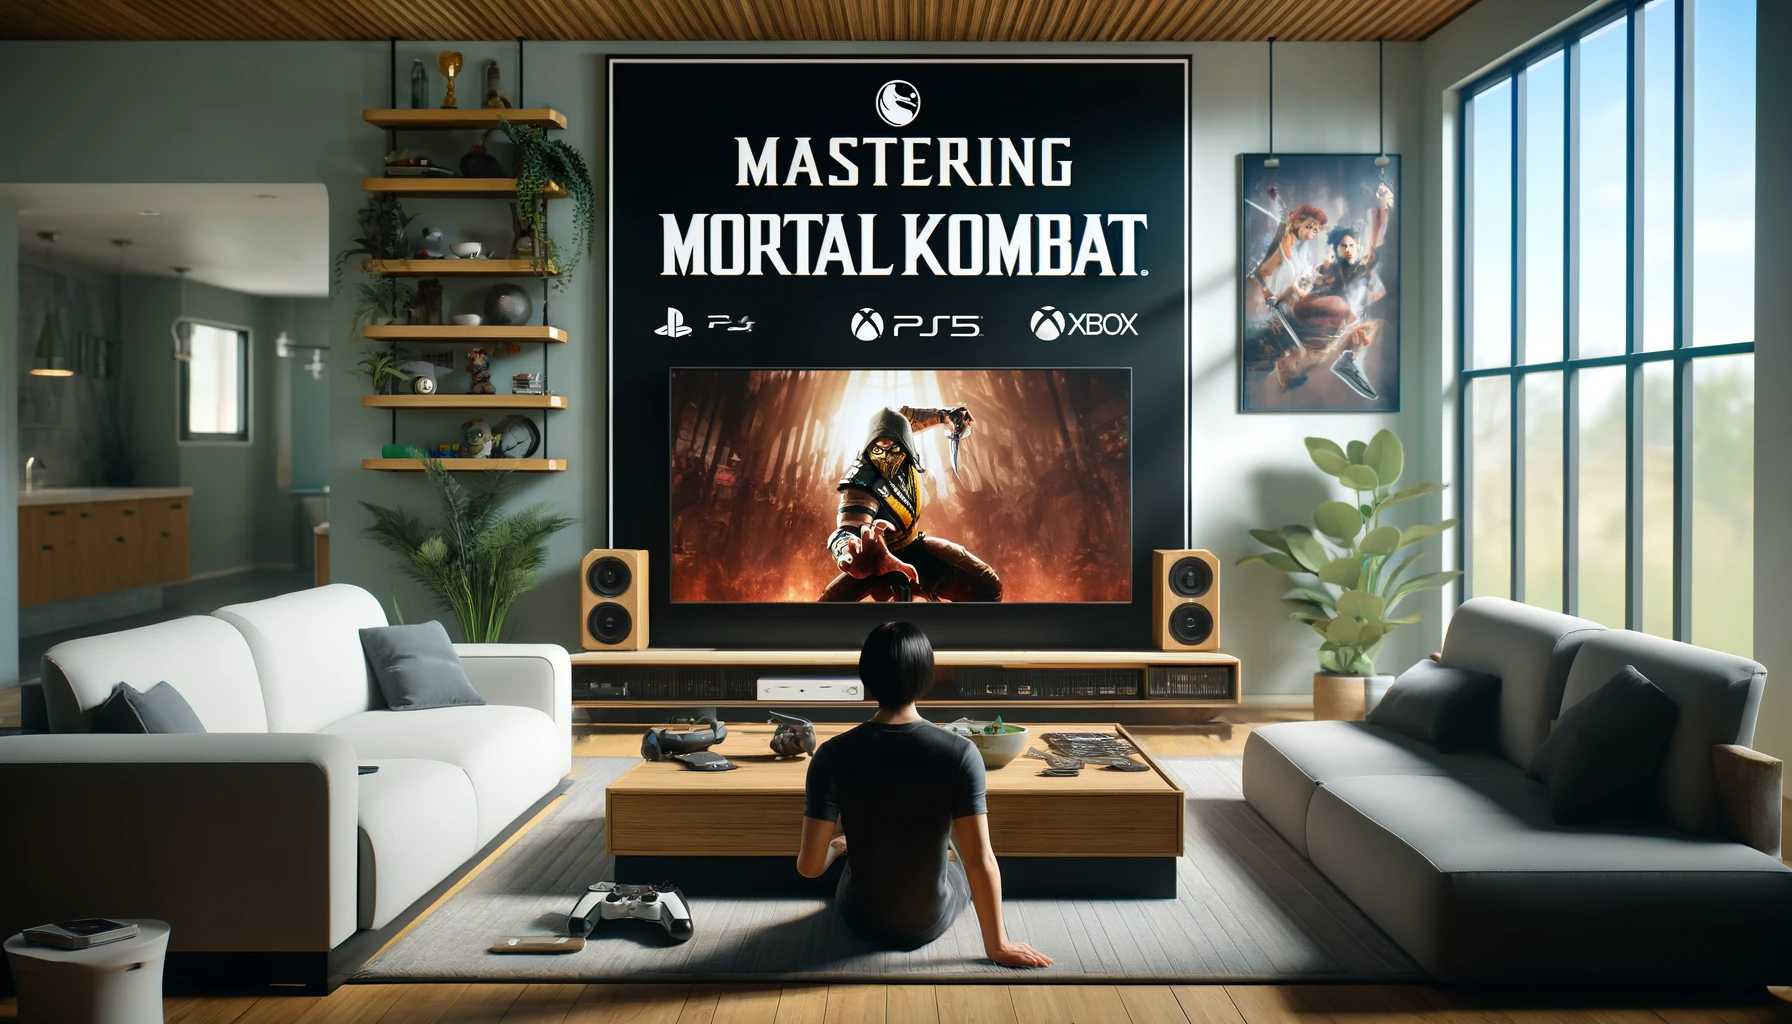 Mastering Mortal Kombat: How to Play on PS4, PS5, and Xbox